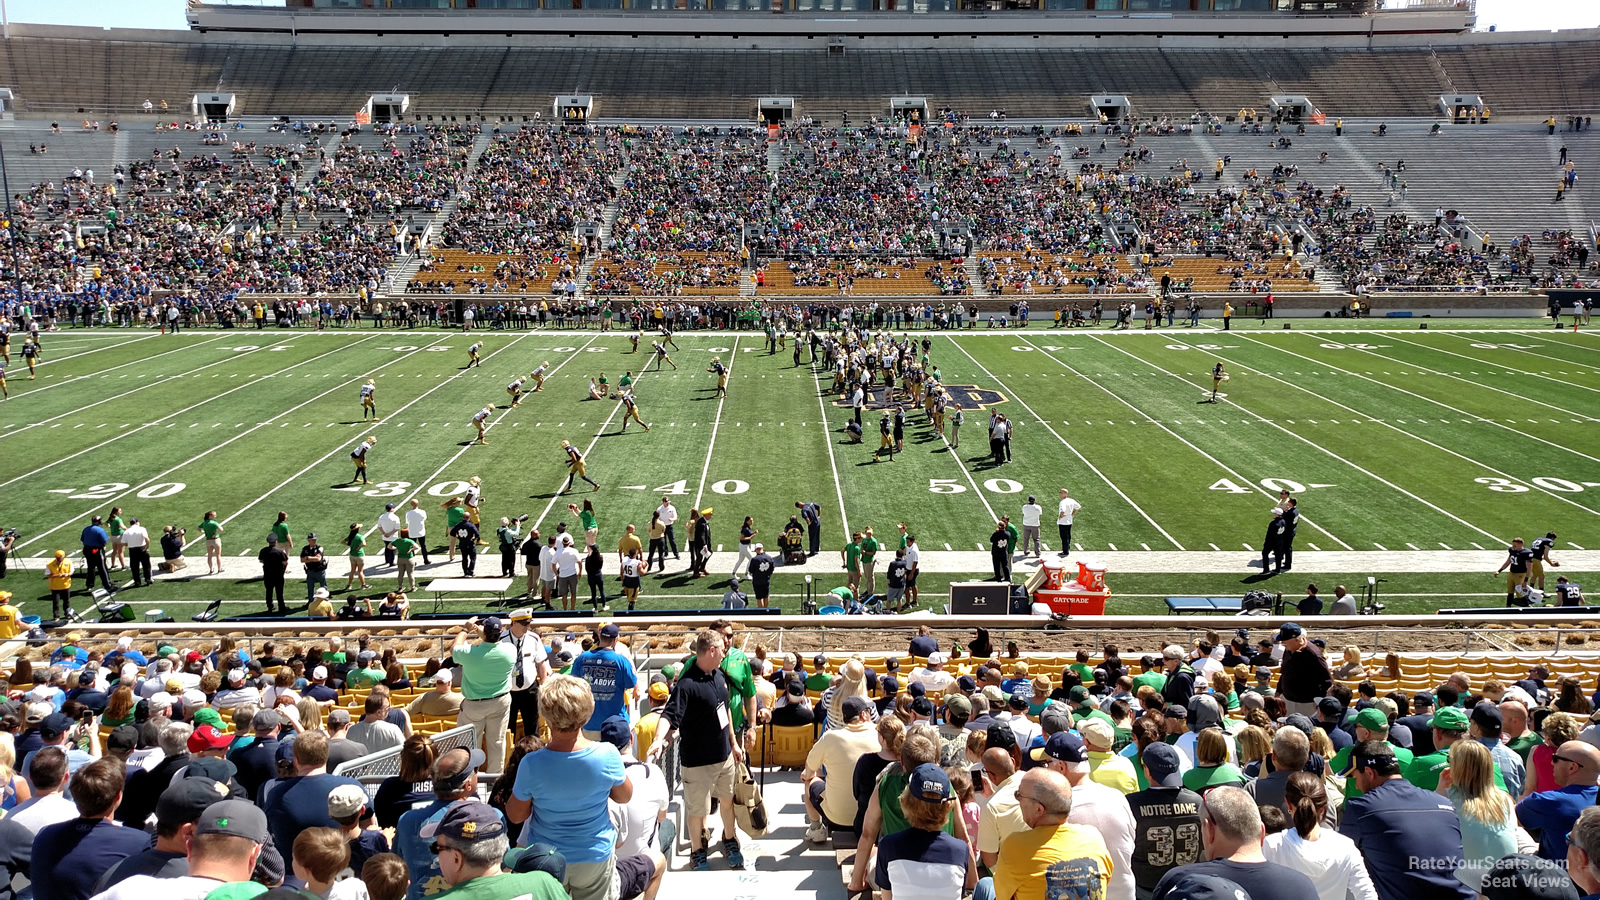 section 28, row 37 seat view  - notre dame stadium